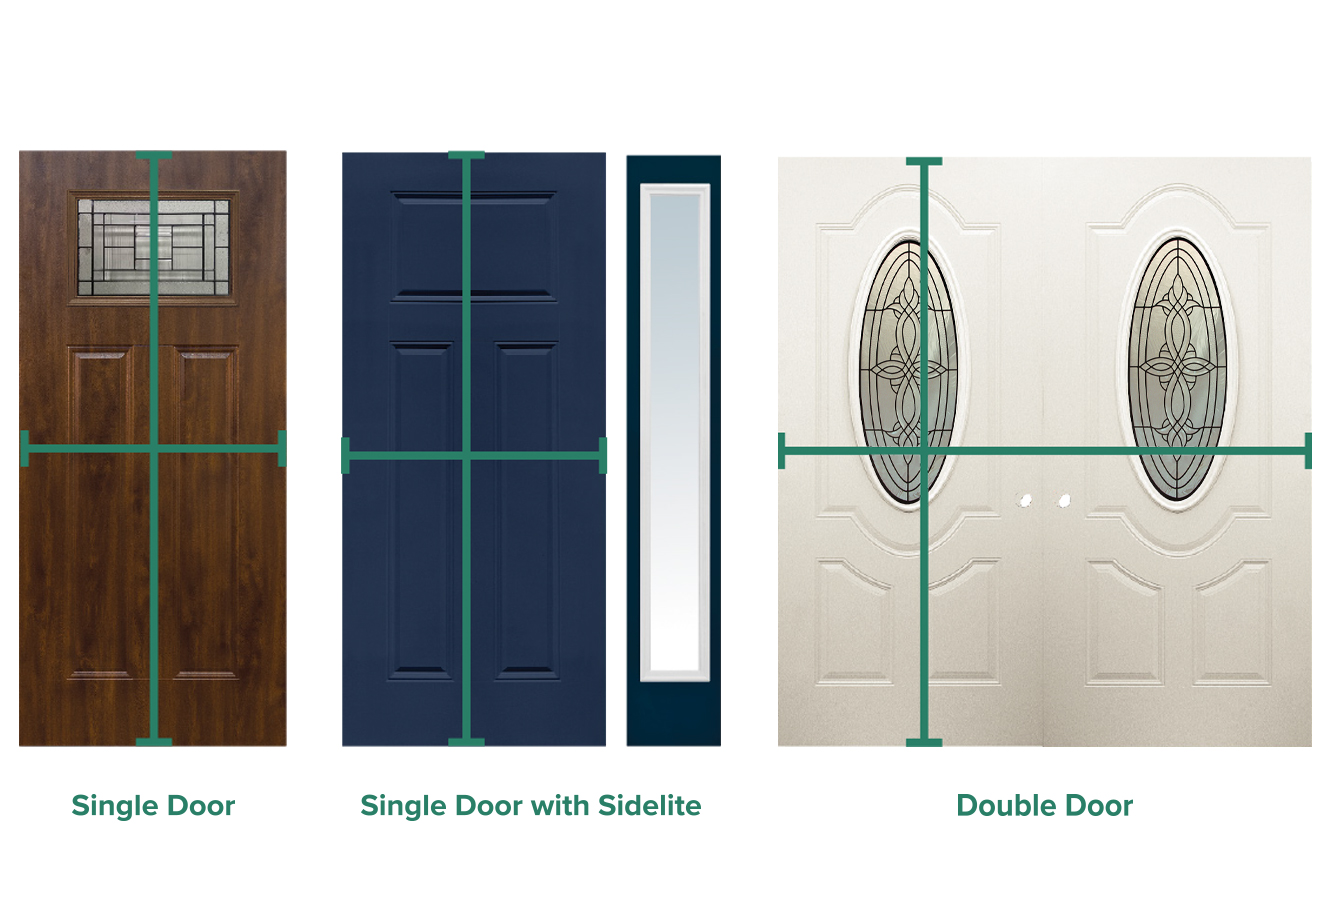 How to choose a double front door - recommendations for choosing